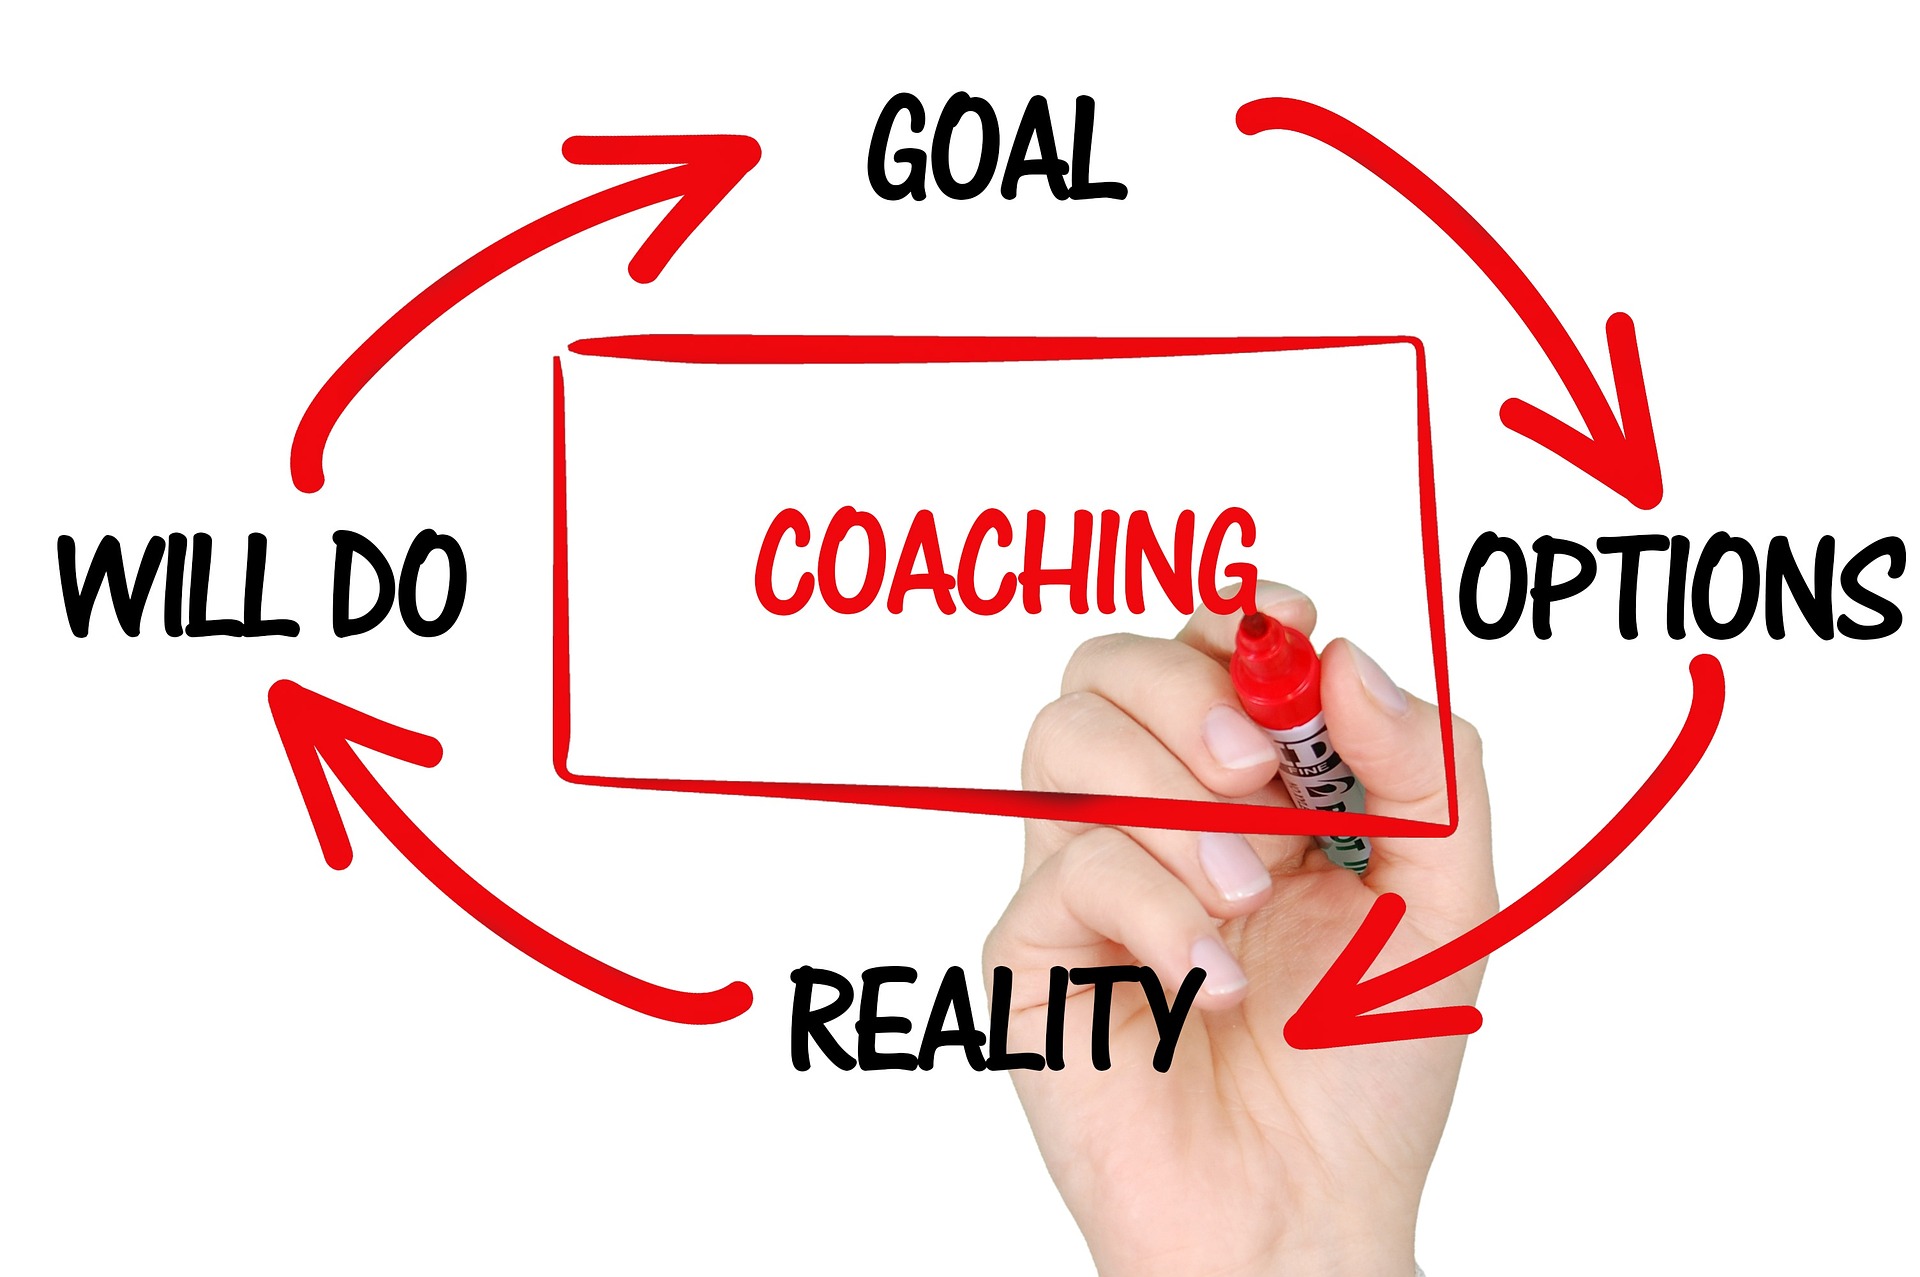 mentoring and coaching